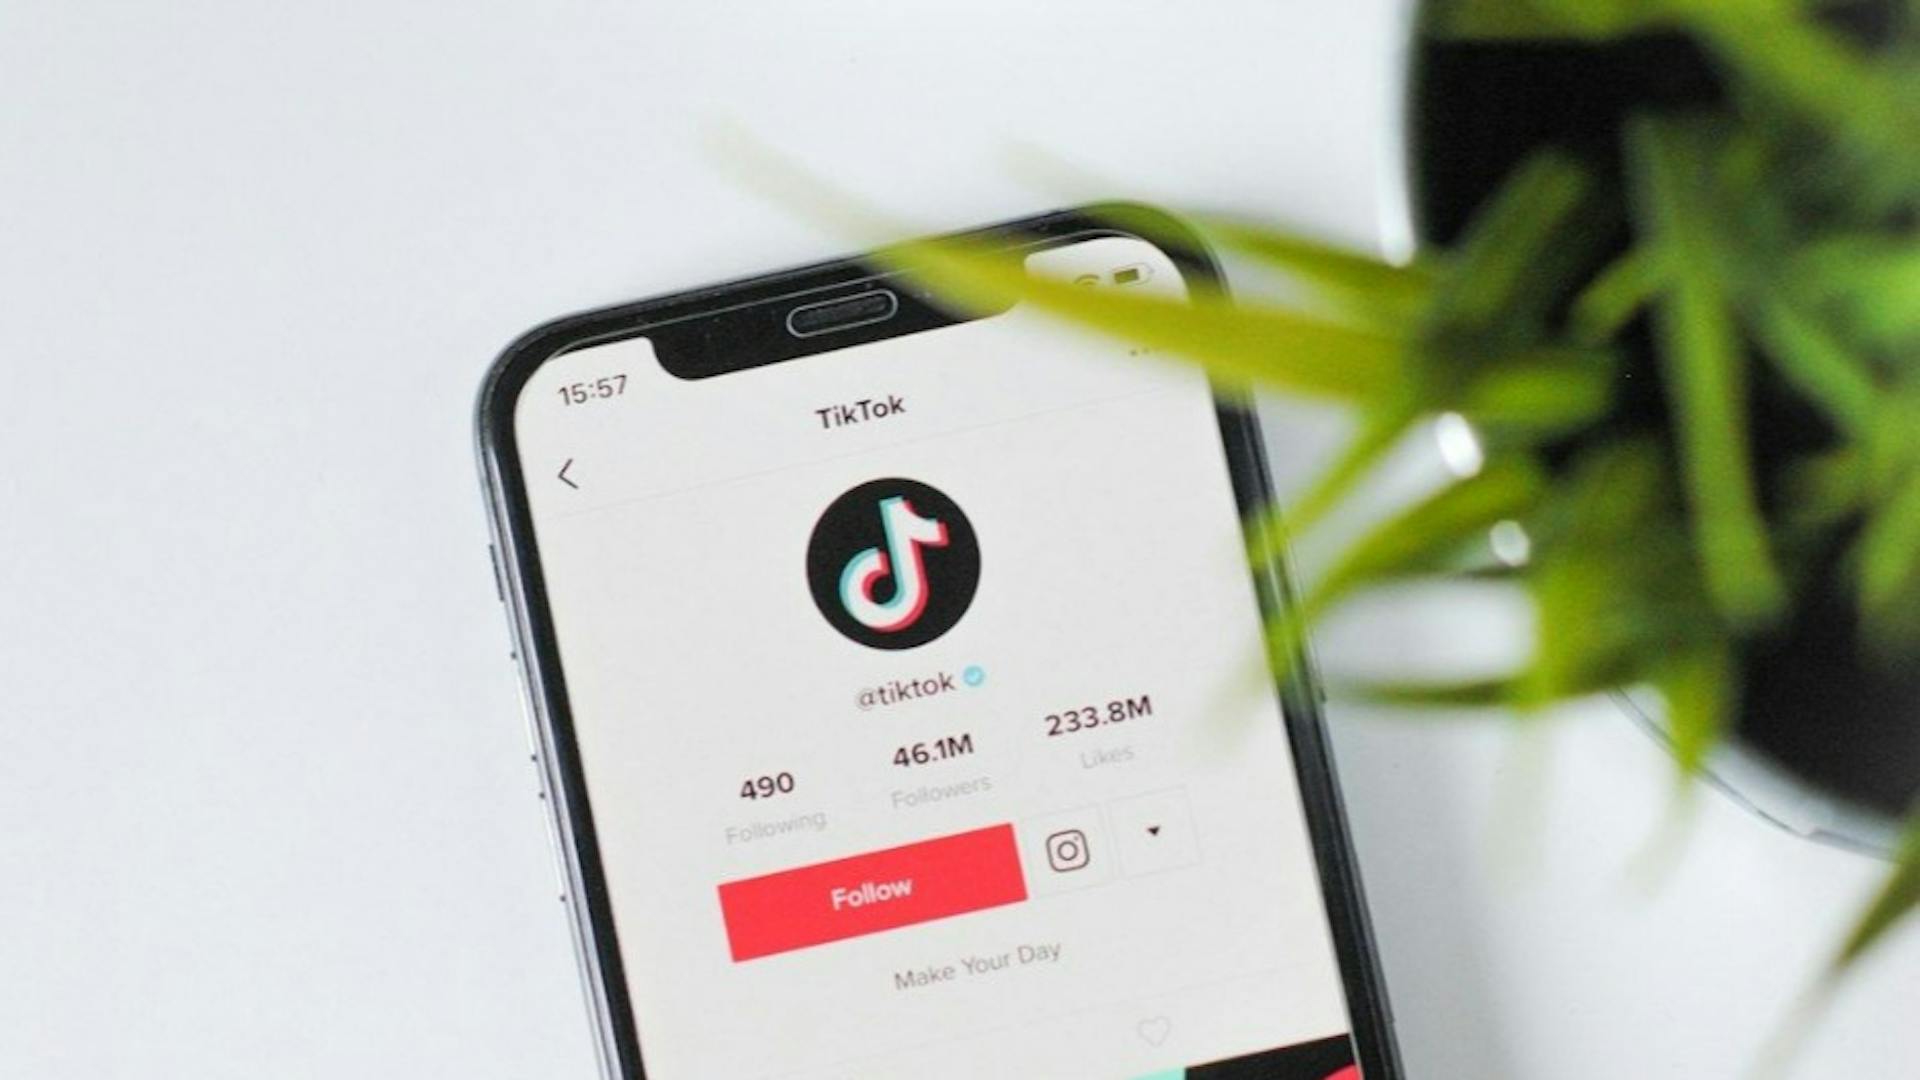 featured image - Everything You Need to Know About TikTok's Lawsuit Against the United States